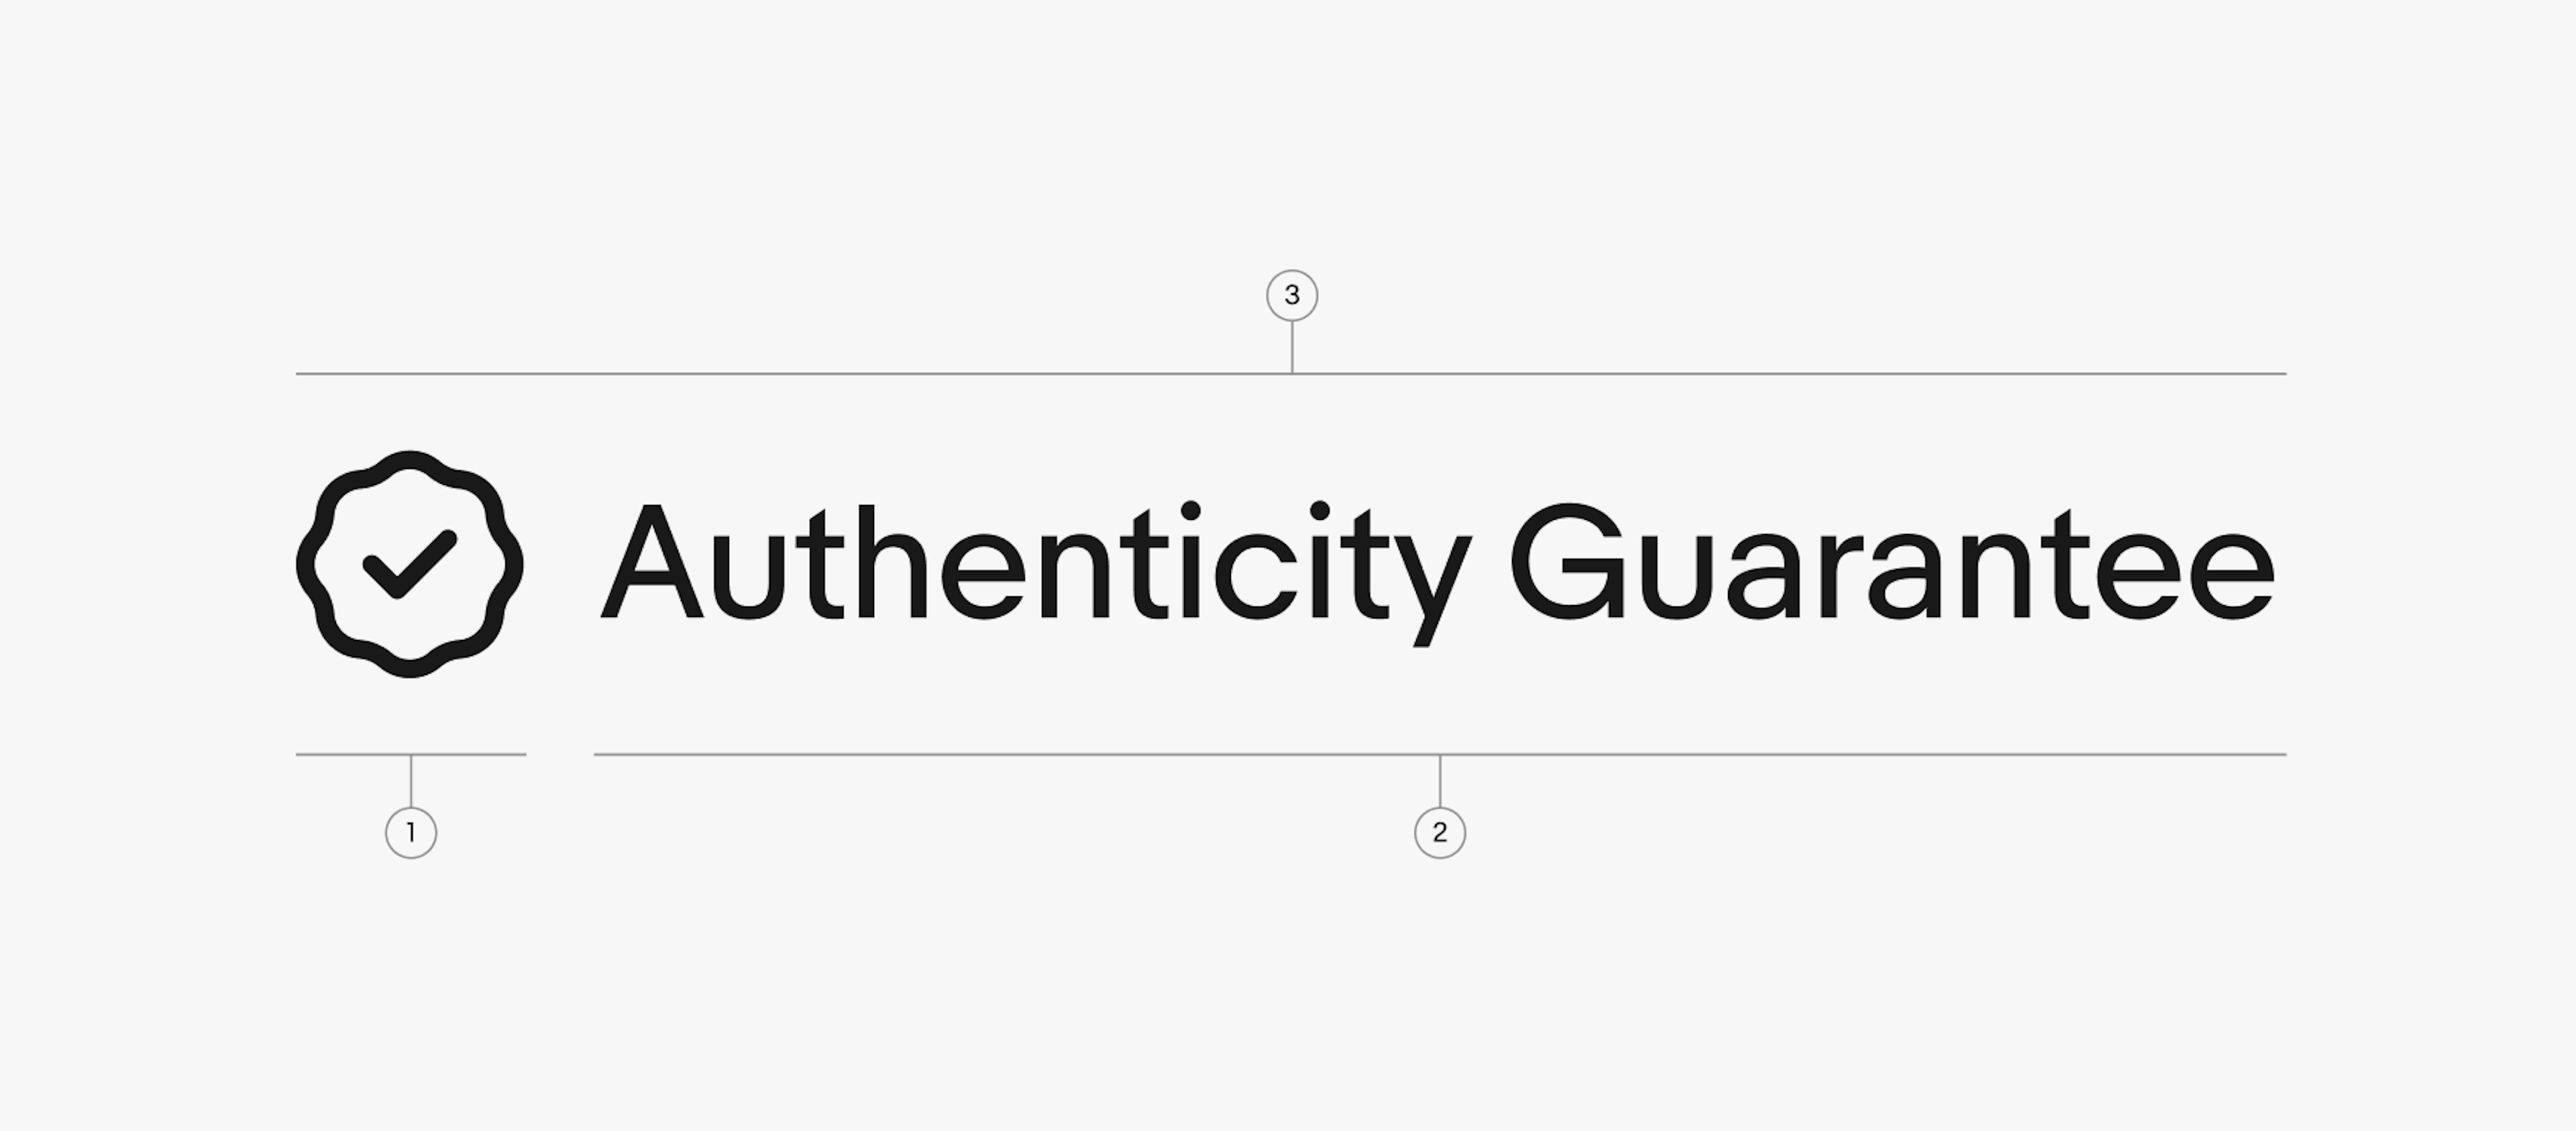 A detailed spec of a program badge lockup. Number 1 points to the program icon. Number 2 points to the program text “Authenticity Guarantee”. Number 3 points to the full lockup.